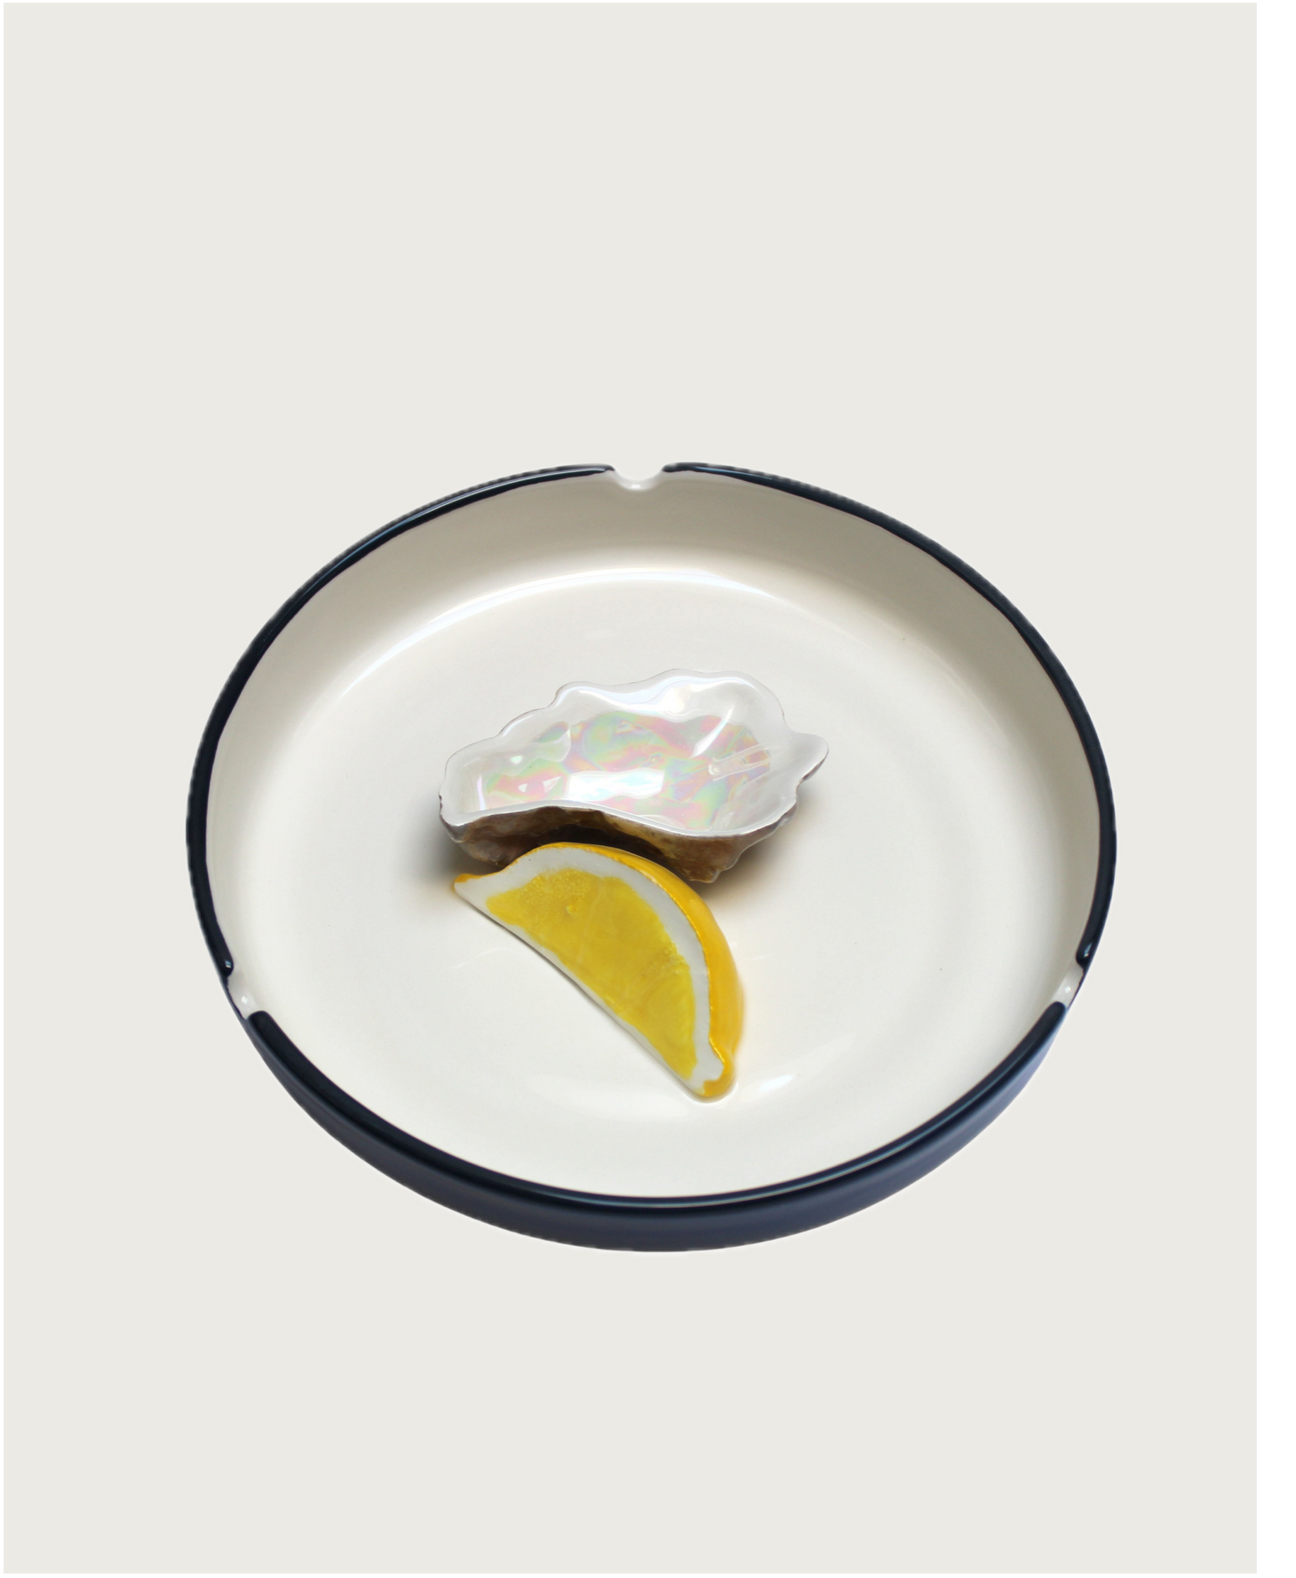 A Plaisir Solitaire Ashtray from Villa Arev with a decorative oyster shell and a lemon wedge made of ceramic, exudes summer vibes. The light-colored interior juxtaposed with a dark rim enhances its charm. This piece radiates warmth, reminiscent of sunlit days by the sea.